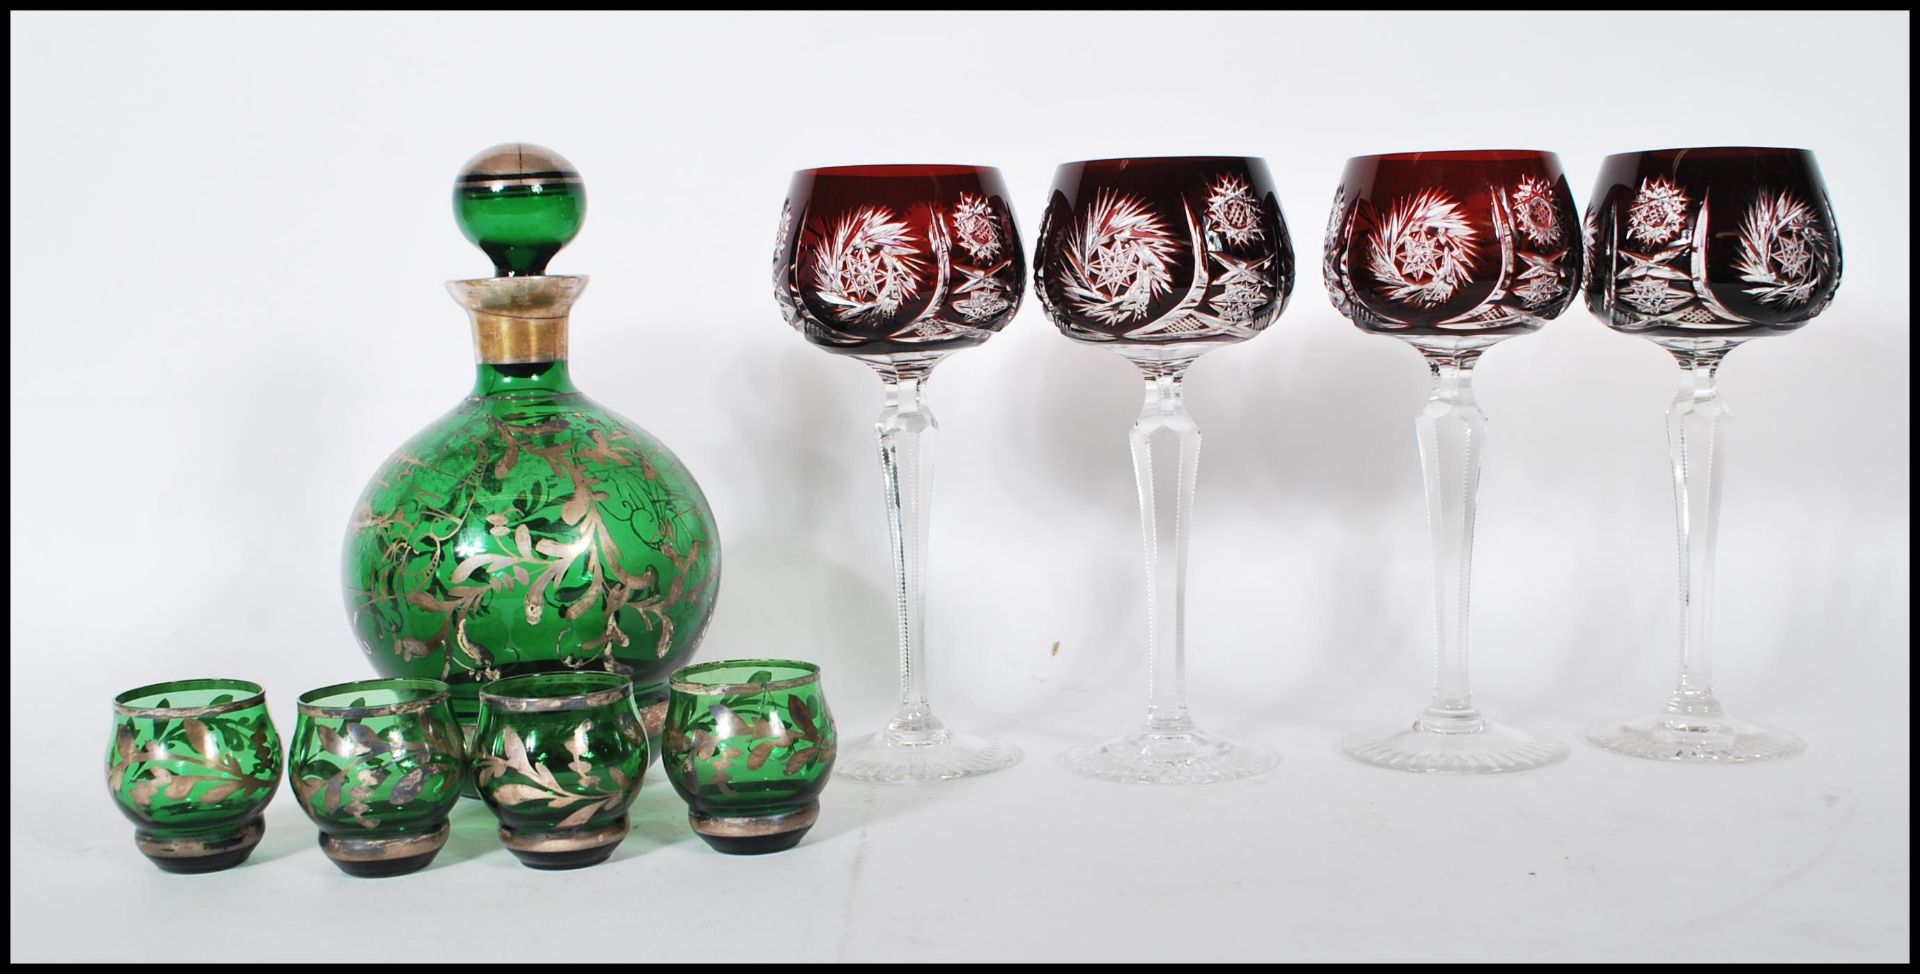 A believed 19th century Loetz manner silver overlay green glass Bohemian decanter and shot glass set